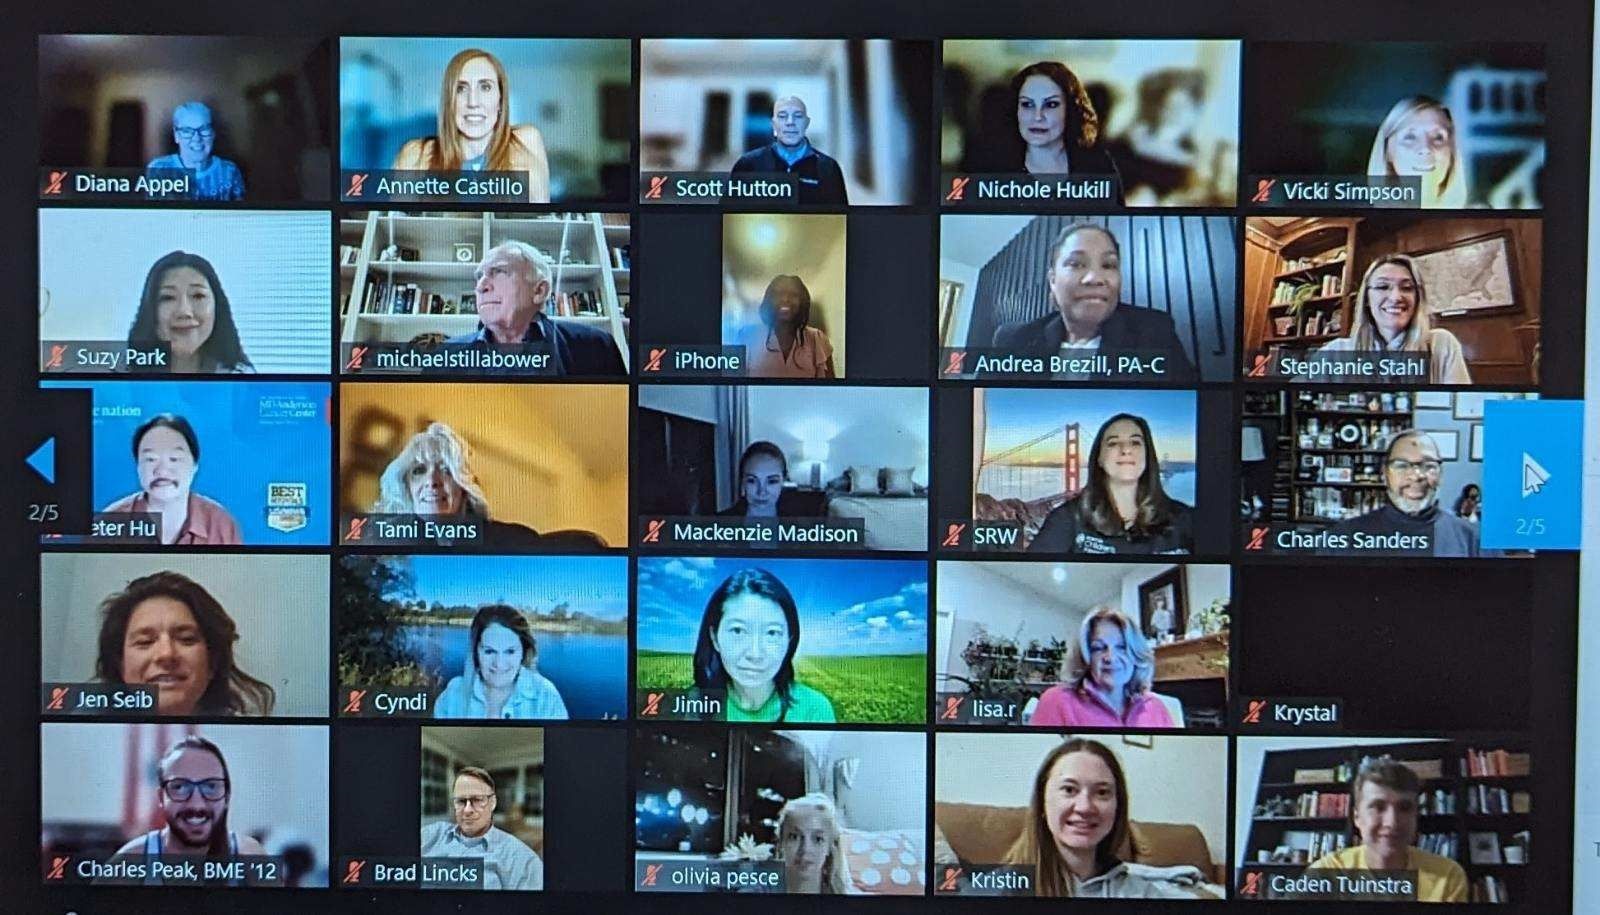 We had about 120 alumni and friends working in the health-care field, including veterinary medicine, join us for the virtual kickoff of the Purdue Alumni Medical Network (PAMN) tonight. We love the energy and enthusiasm!